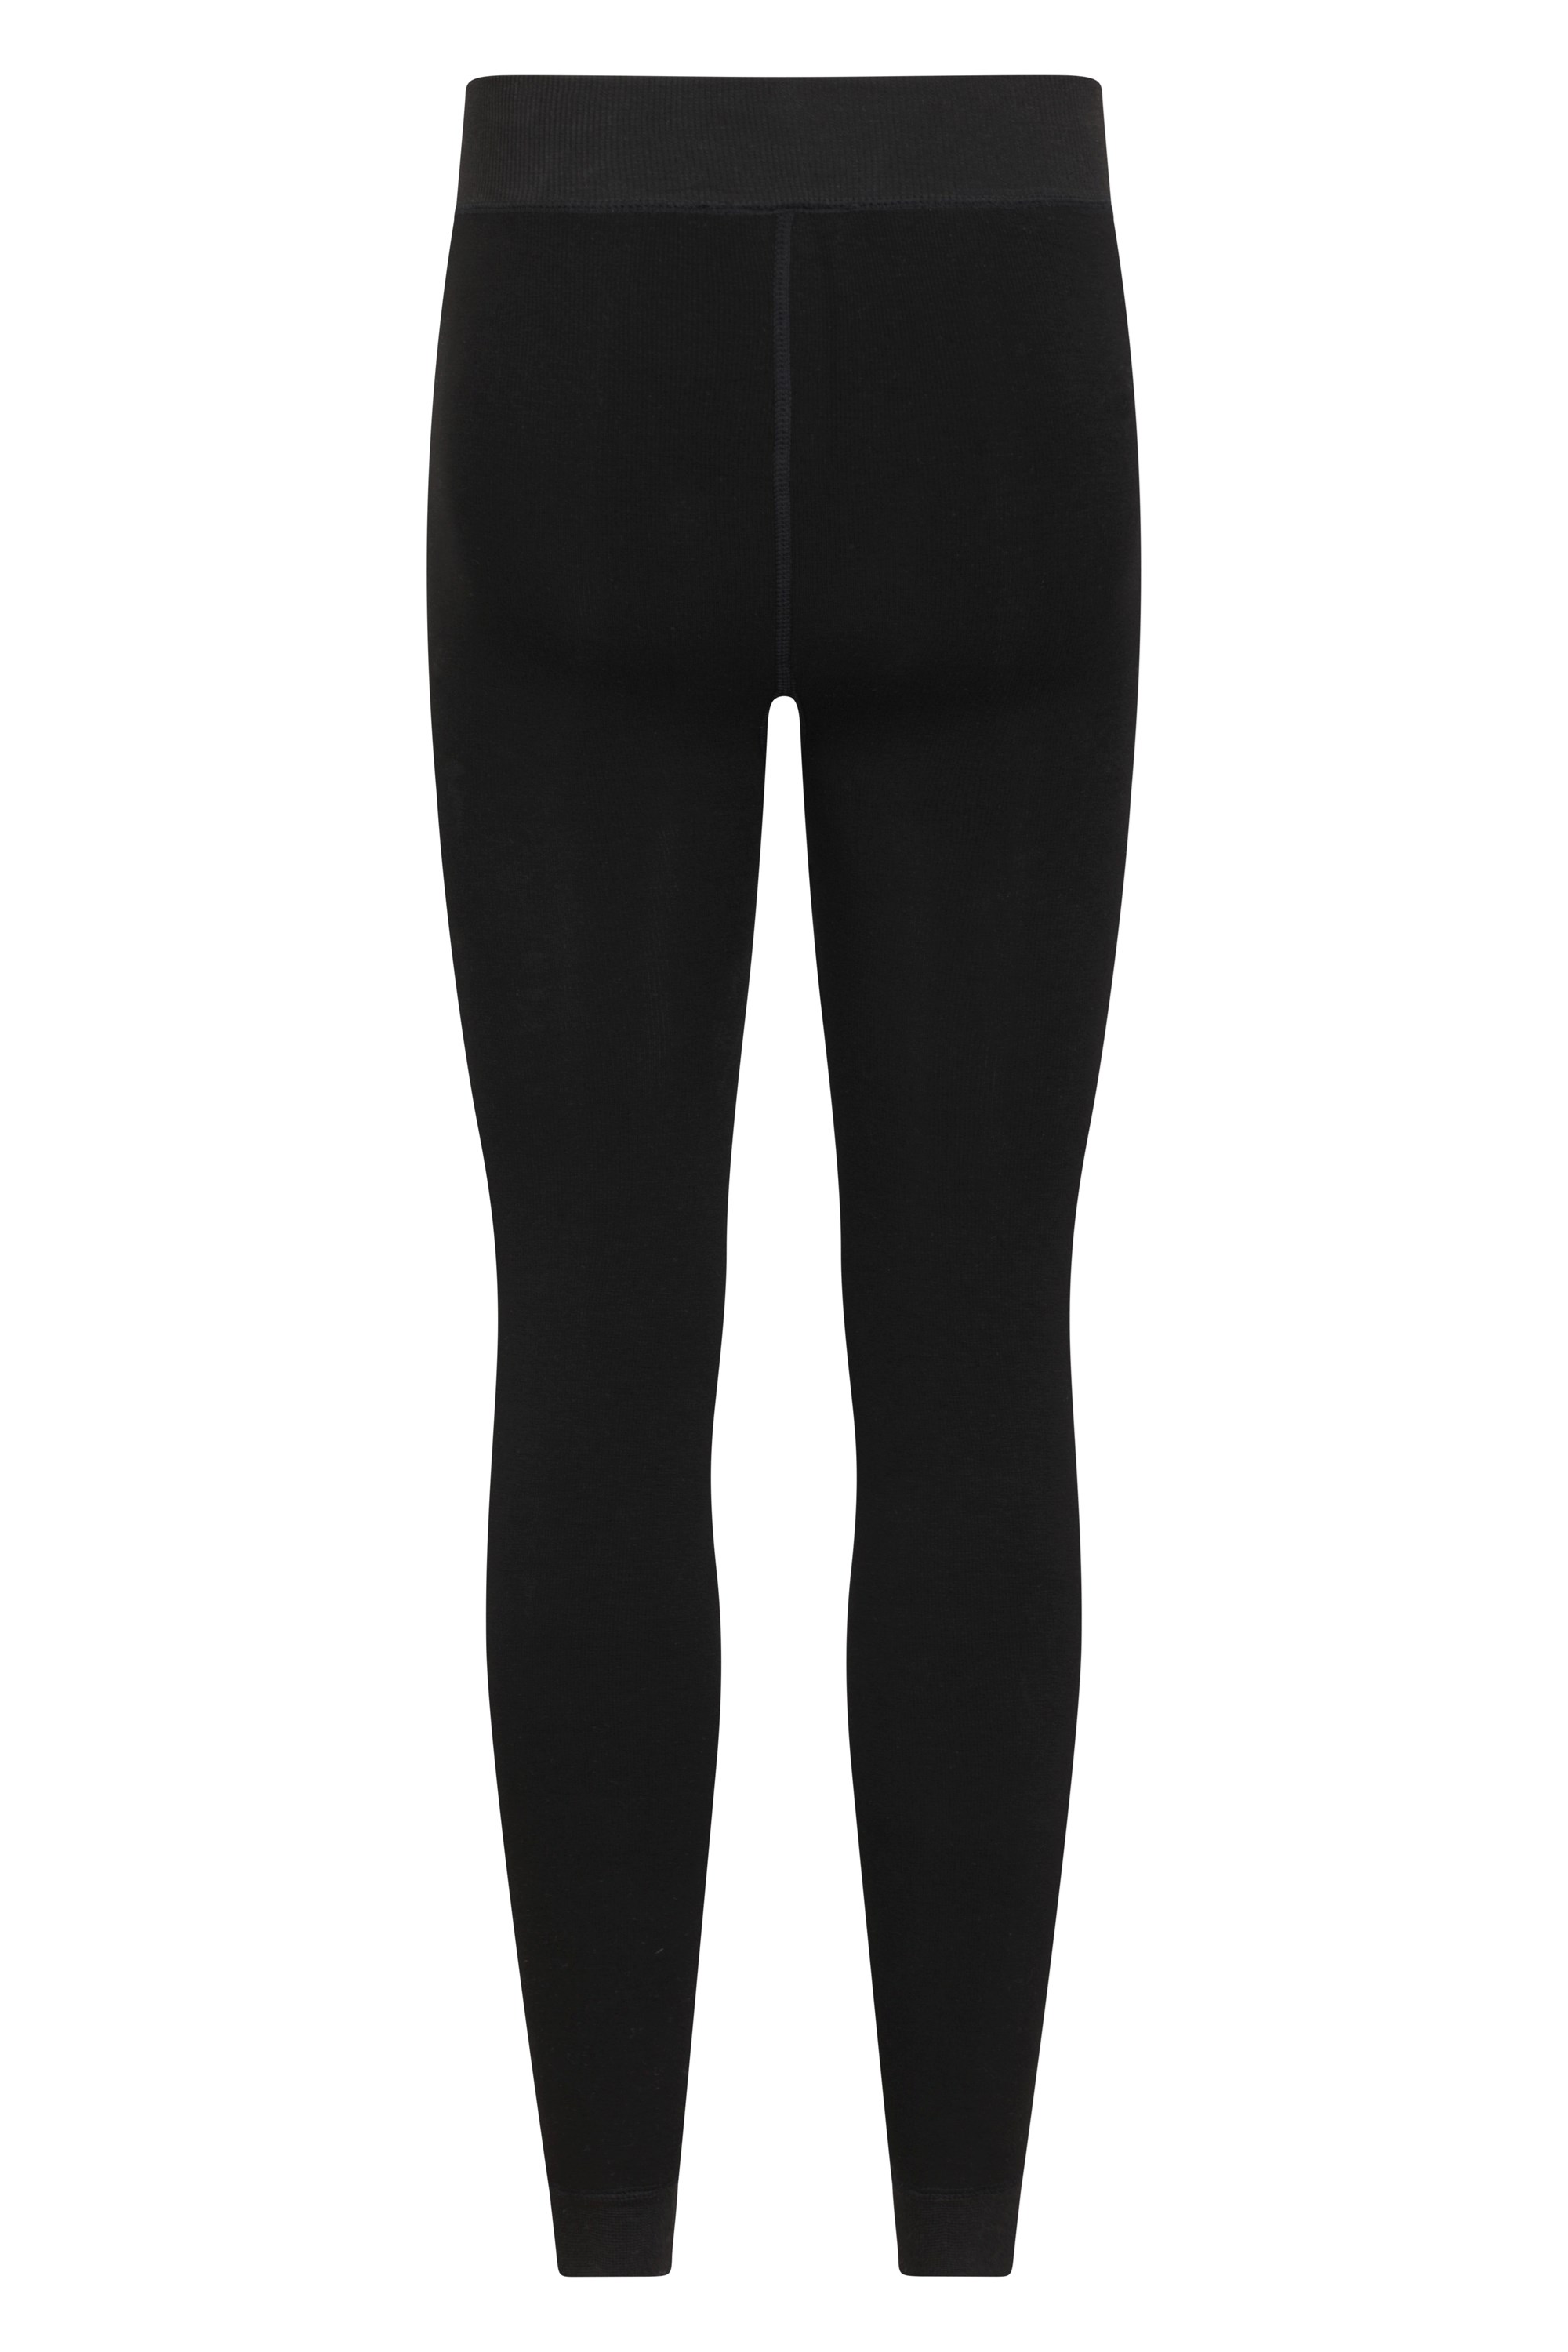 Stems Fleece Lined Thermal Leggings | Nordstrom-cacanhphuclong.com.vn